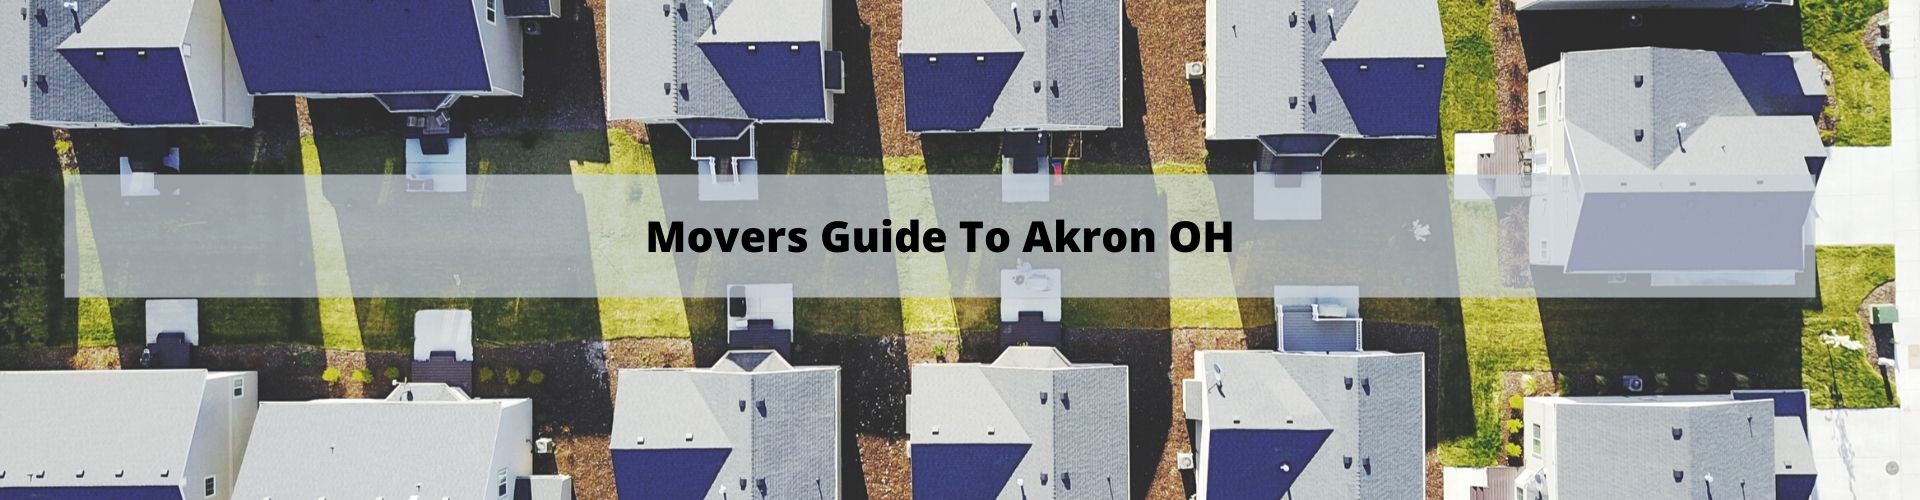 Mover's Guide to Akron OH